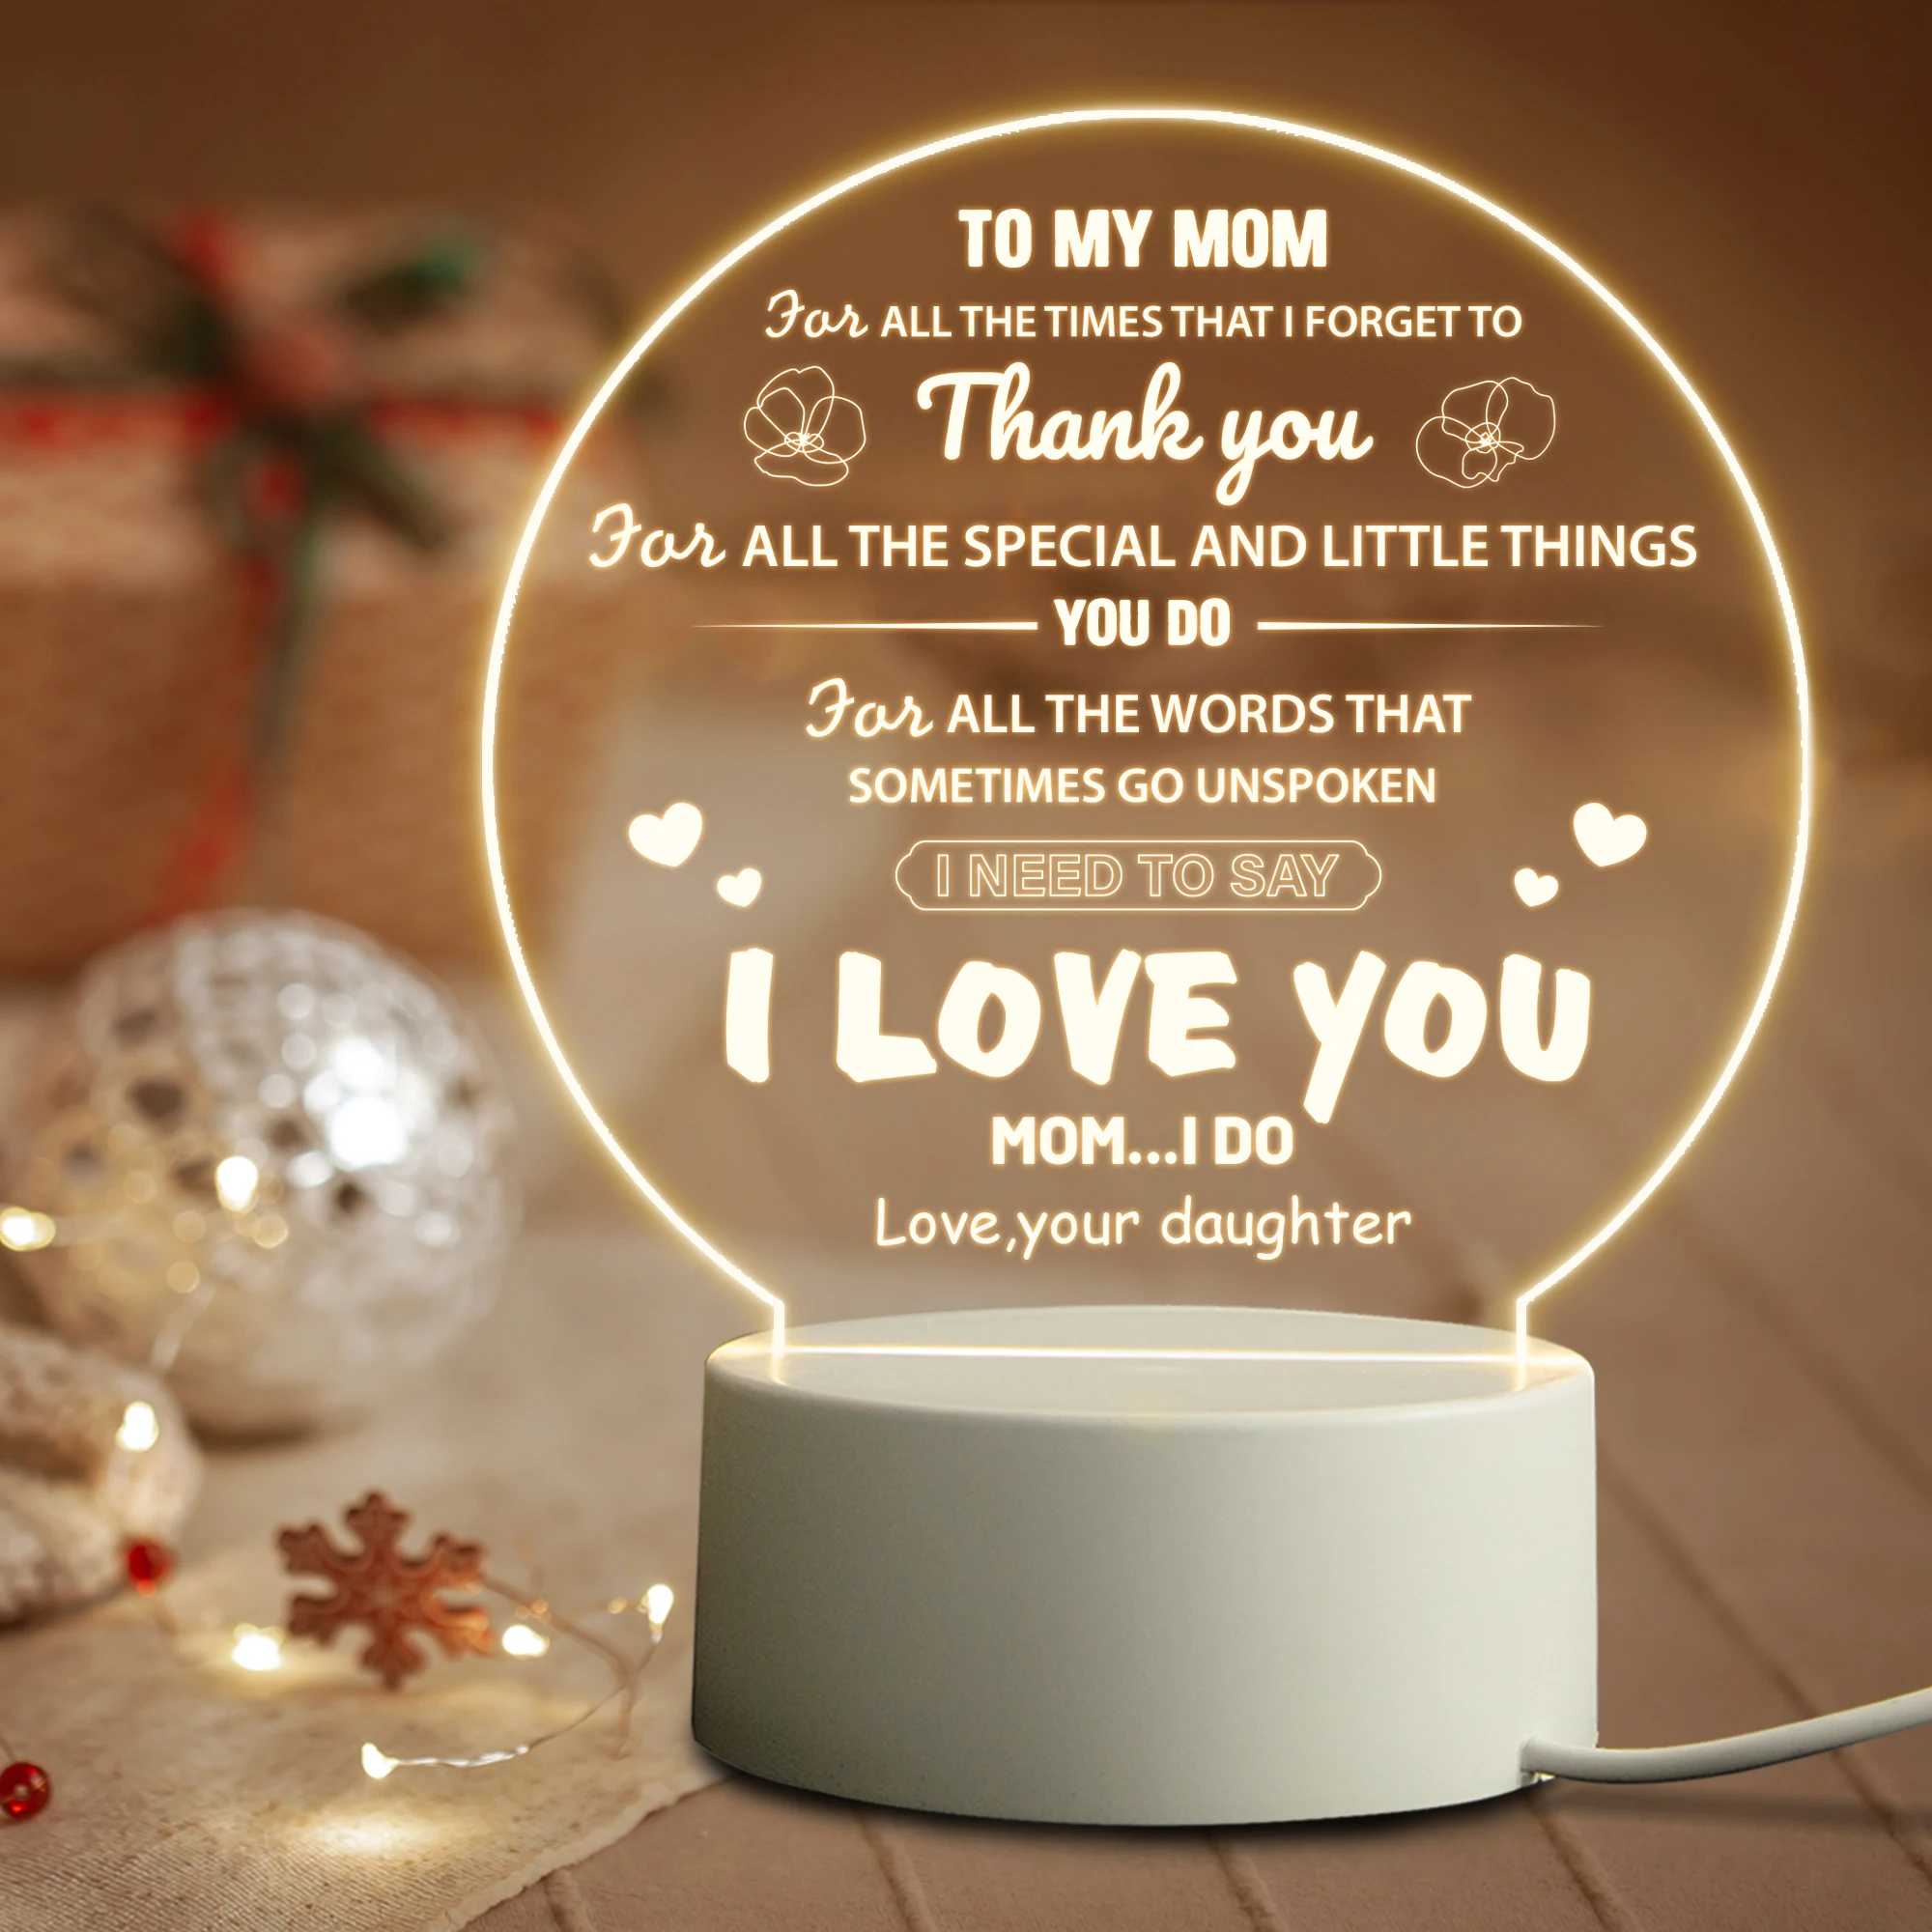 https://ae01.alicdn.com/kf/Hb812292a30004111837d21ce0dfca46aD/Mom-Gifts-Engraved-3D-Warm-Night-Lights-Acrylic-USB-Night-Lamp-Gift-for-Mother-Birthday-Christmas.jpg